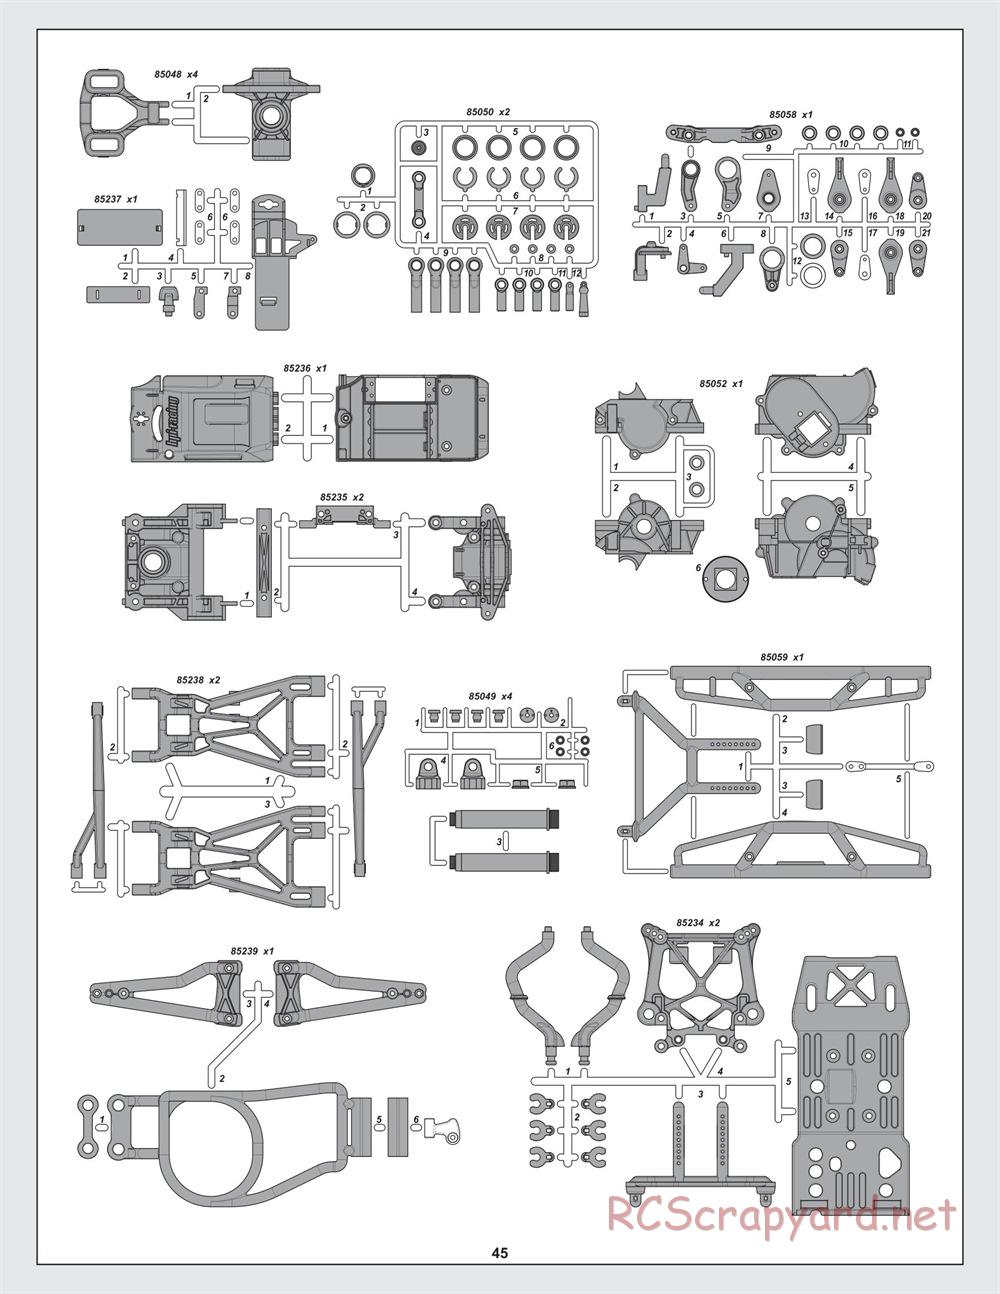 HPI - Savage-X 4.6 - Exploded View - Page 45